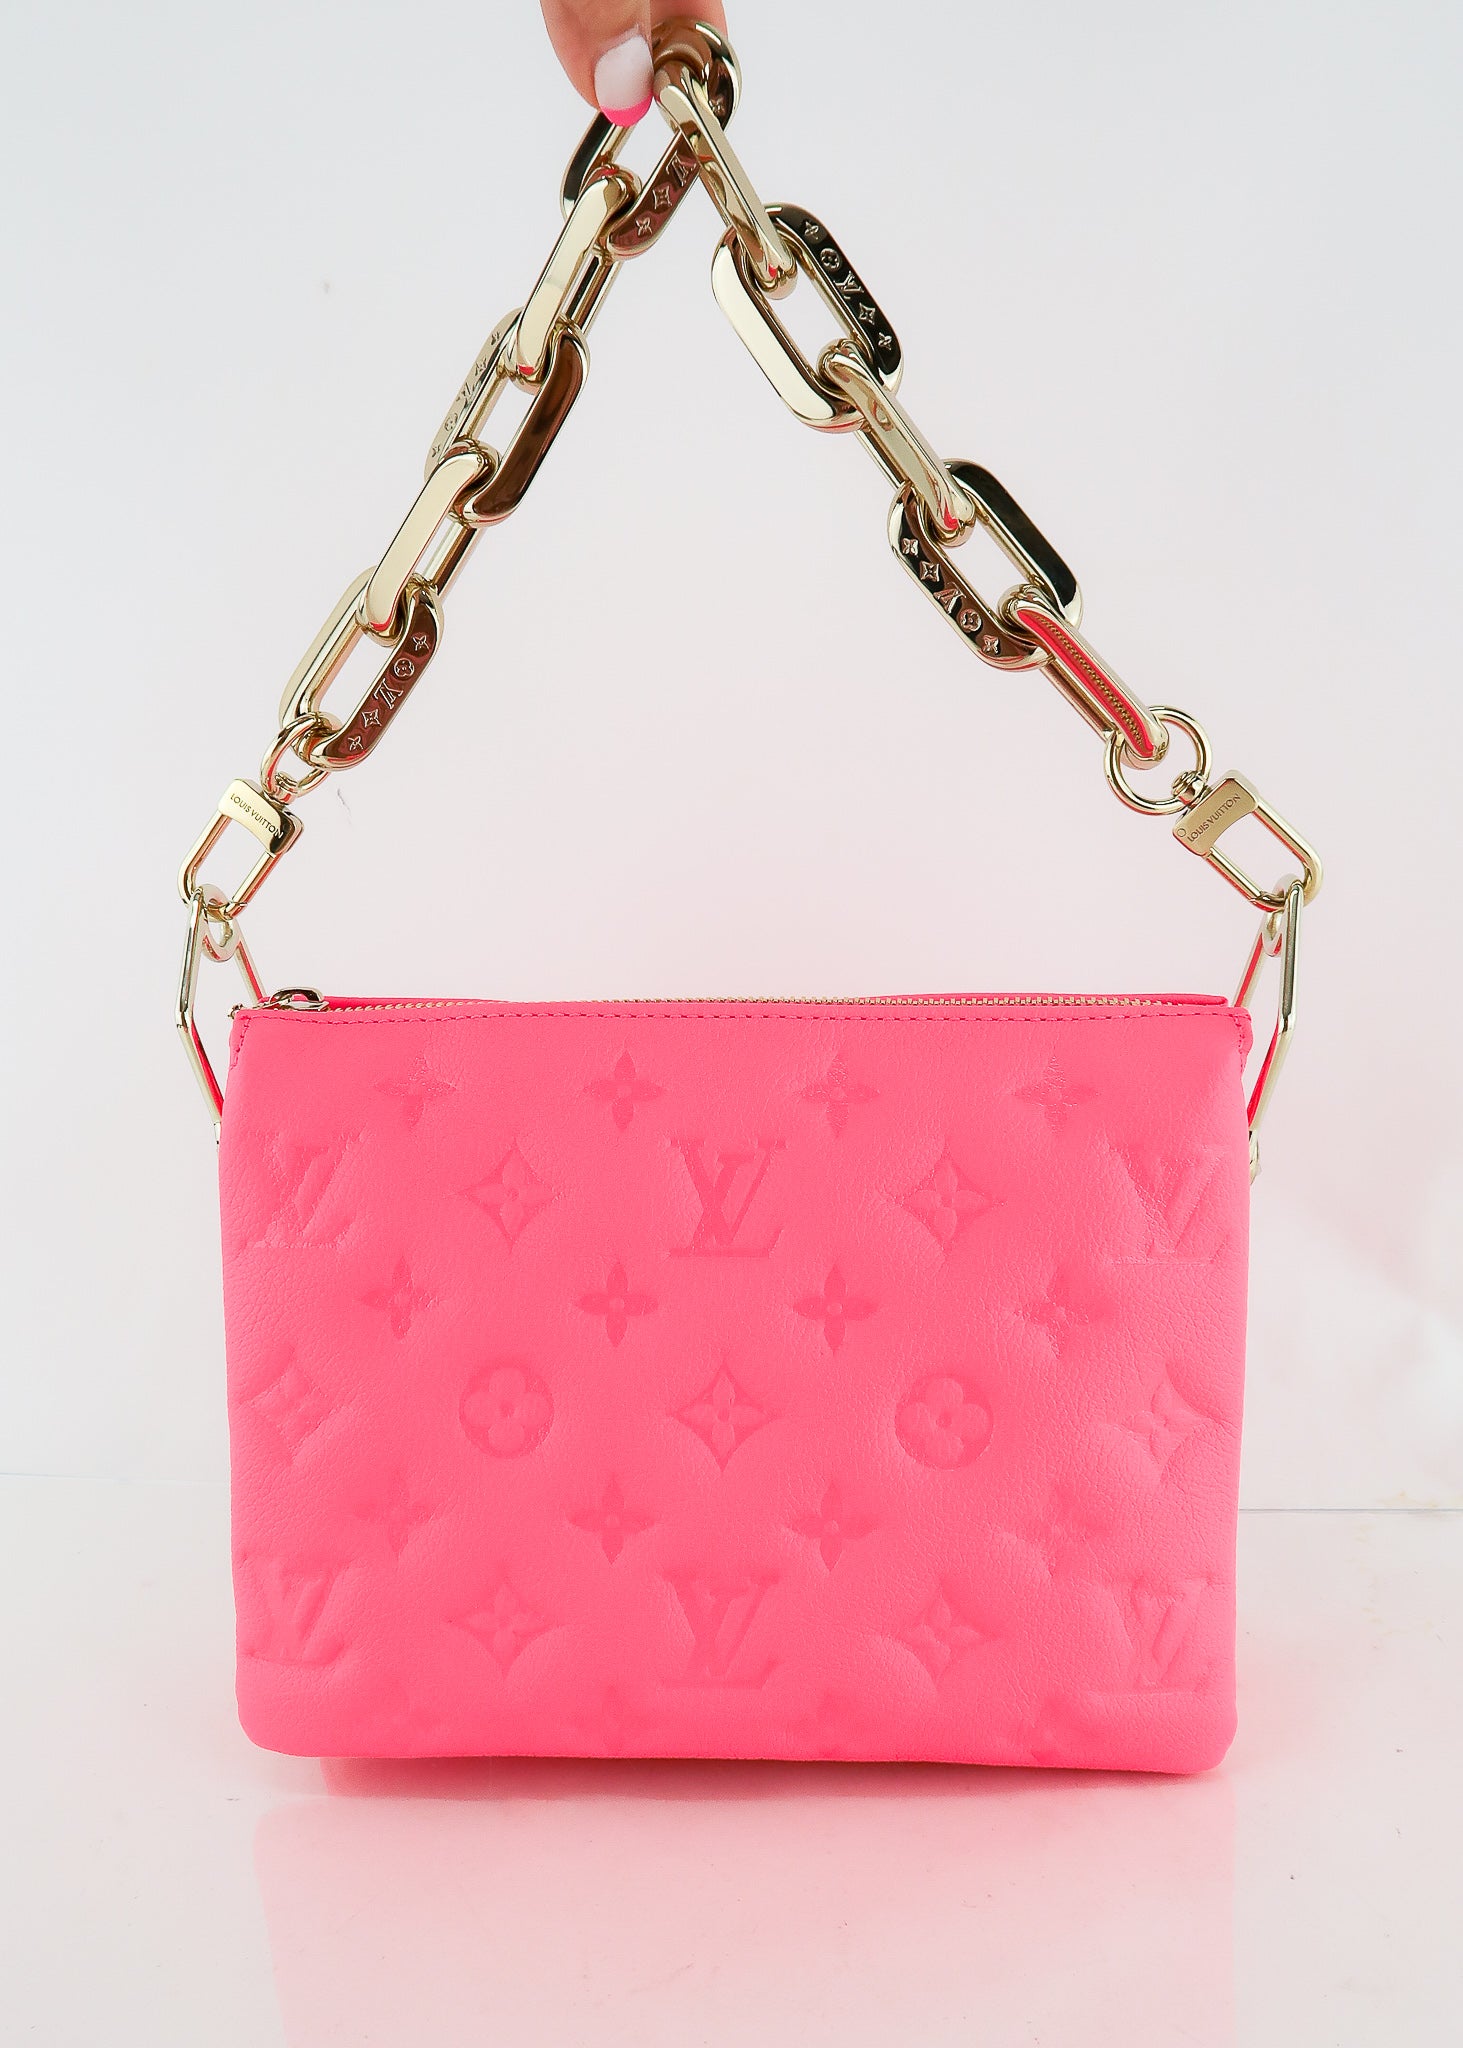 LOUIS VUITTON, Coussin Bb Grained Calfskin Cross Body, Pink, (One Size),  New, Tradesy